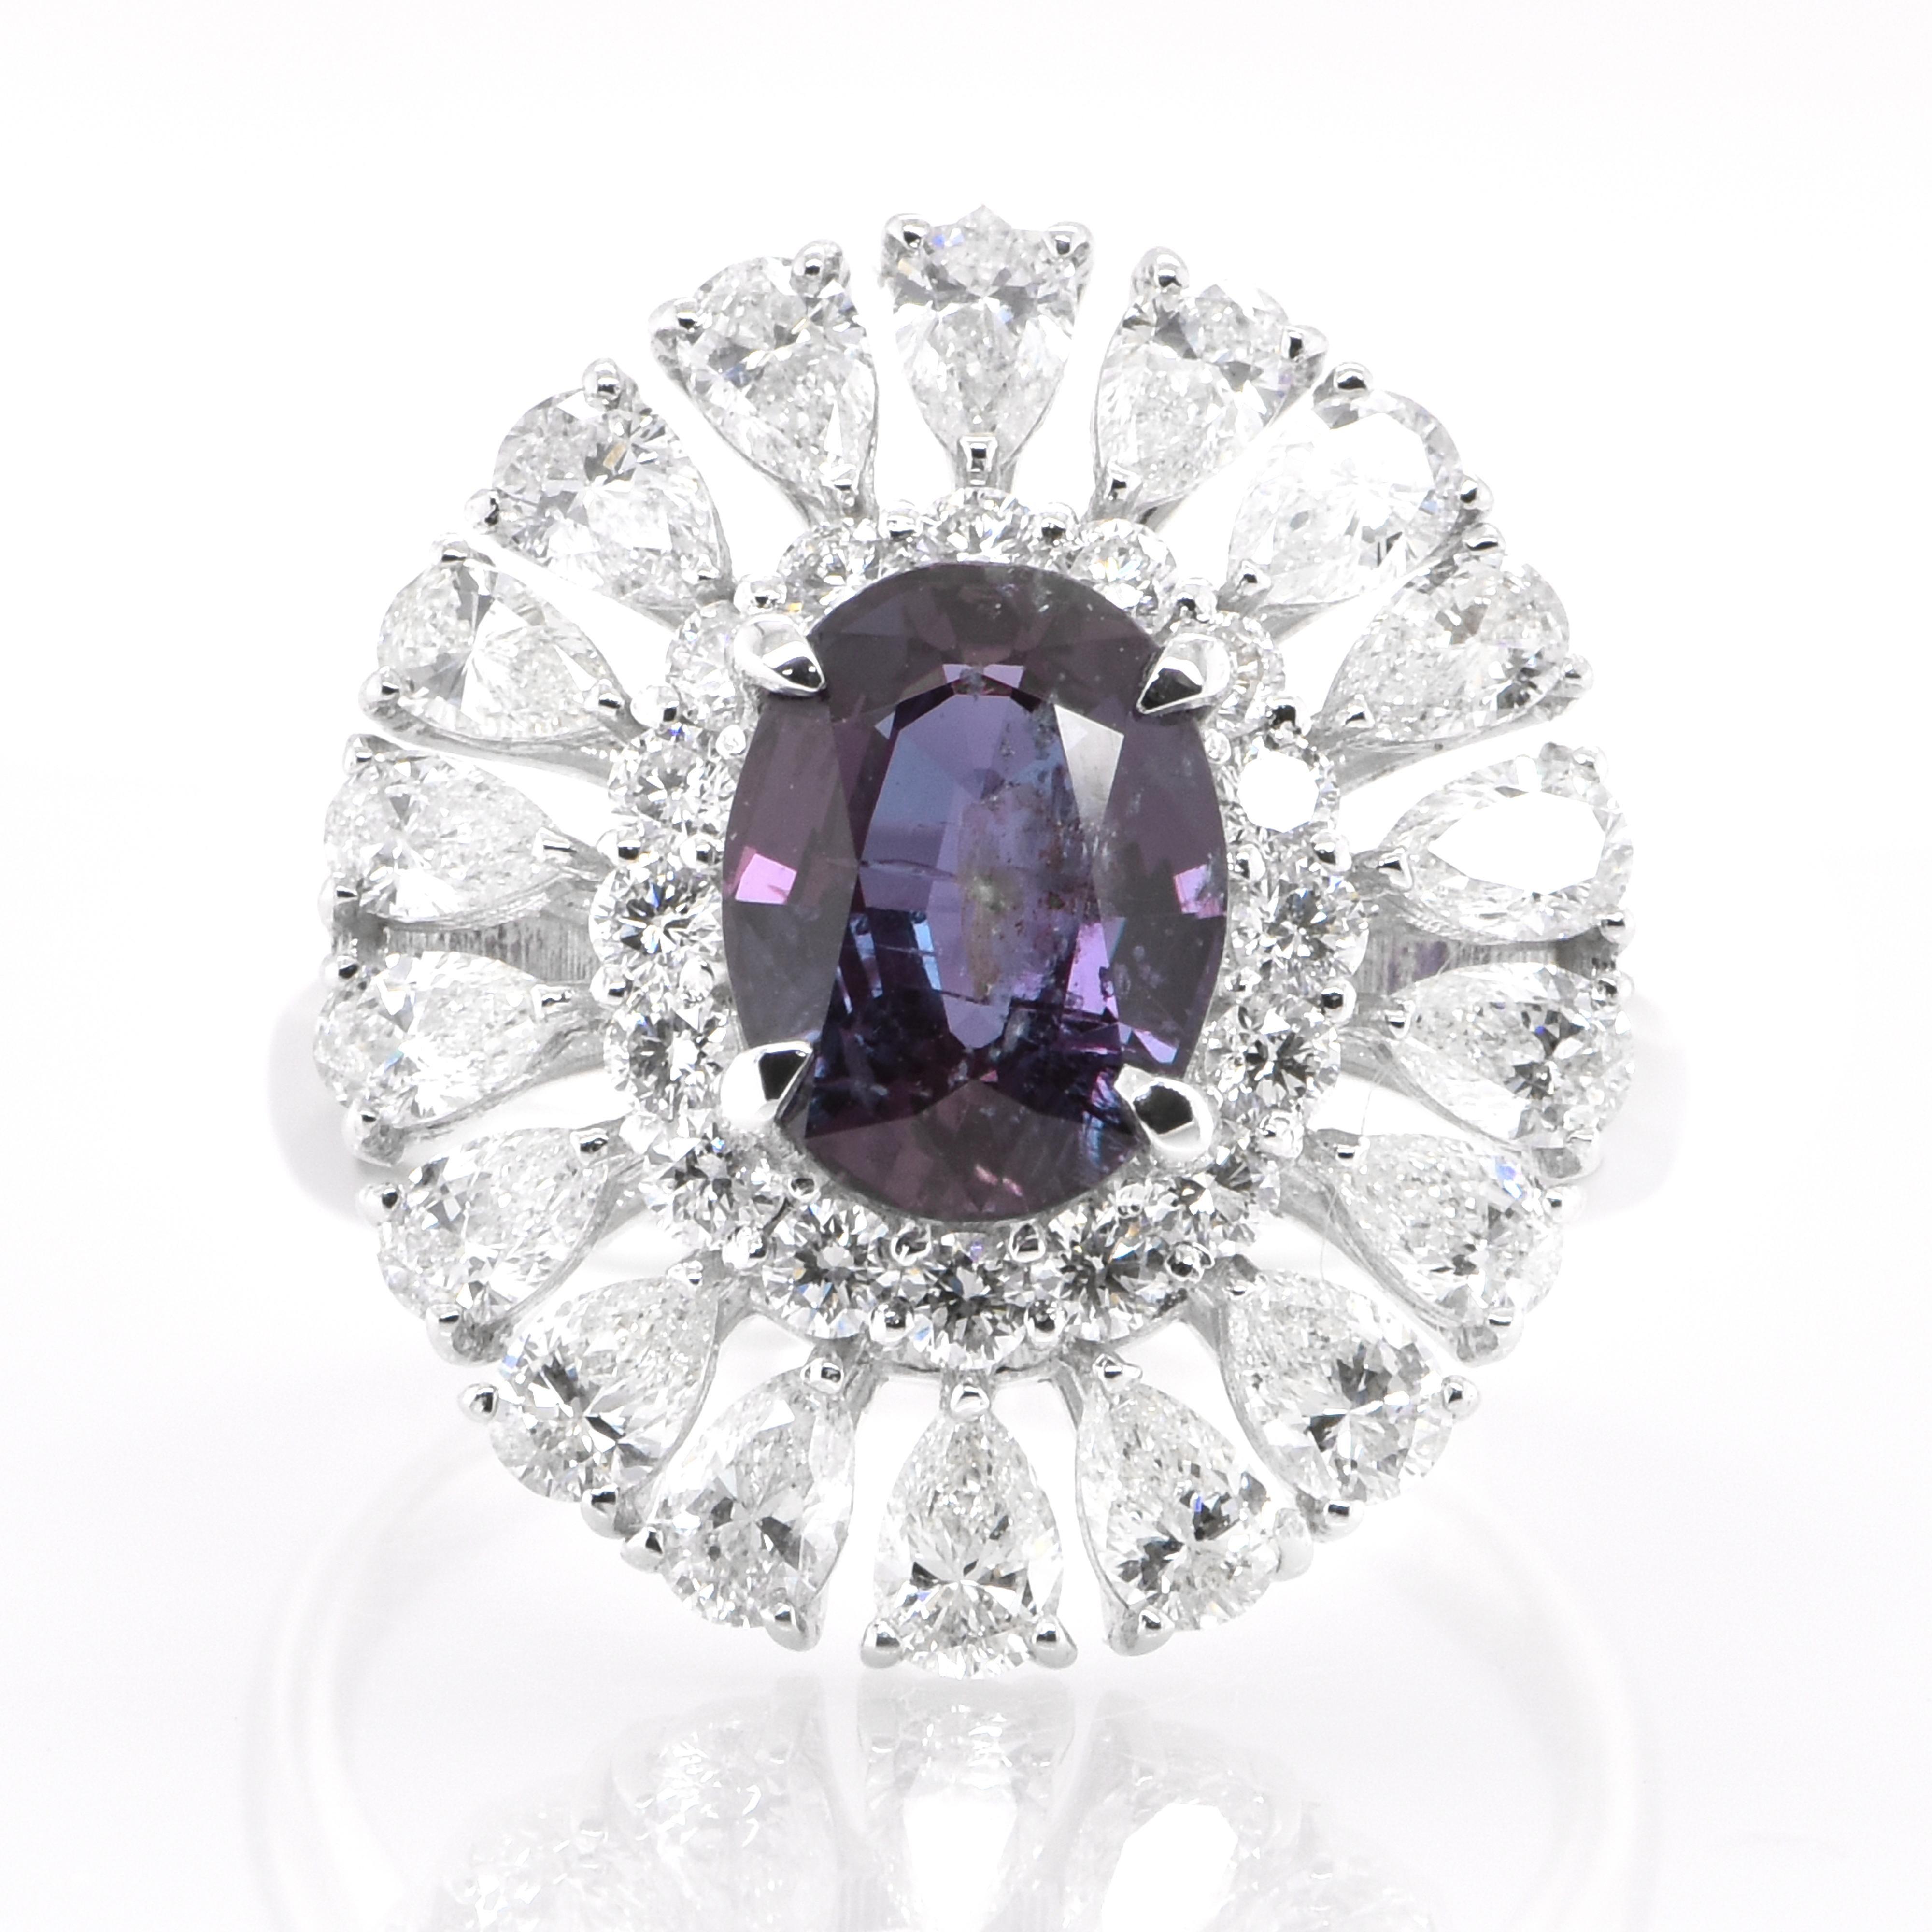 A gorgeous ring featuring a 2.39 Carat, Natural Brazilian Alexandrite and 2.06 Carats of Diamond Accents set in Platinum. Alexandrites produce a natural color-change phenomenon as they exhibit a Bluish Green Color under Fluorescent Light whereas a